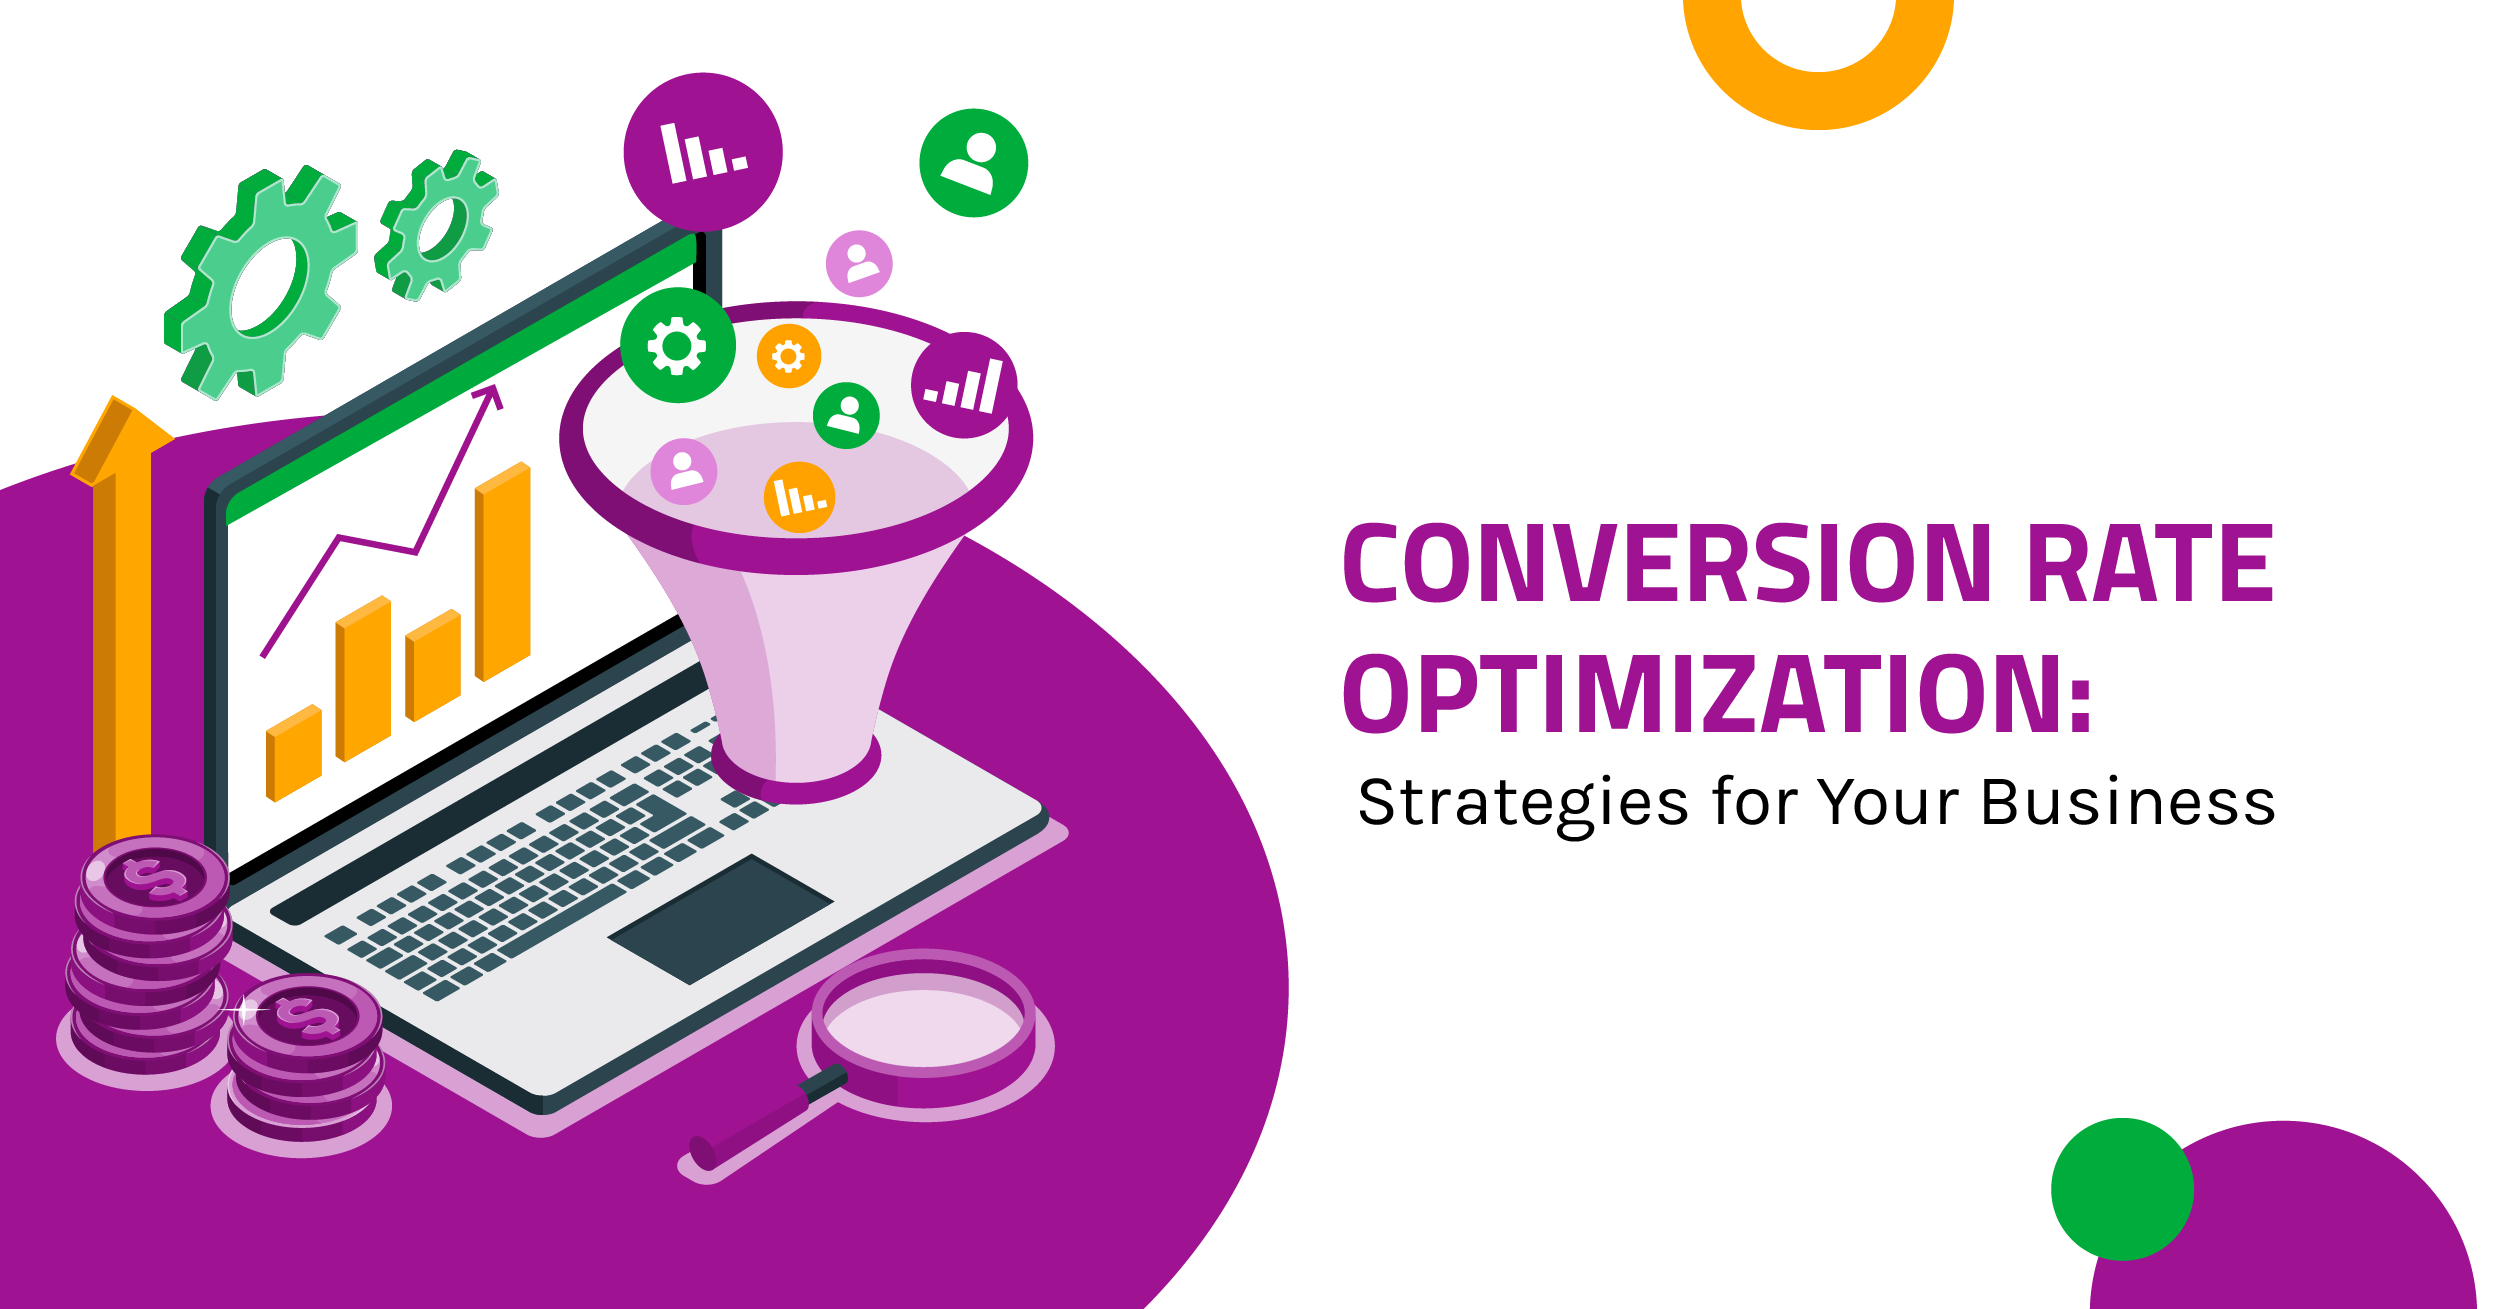 Conversion Rate Optimization: Strategies for Your Business